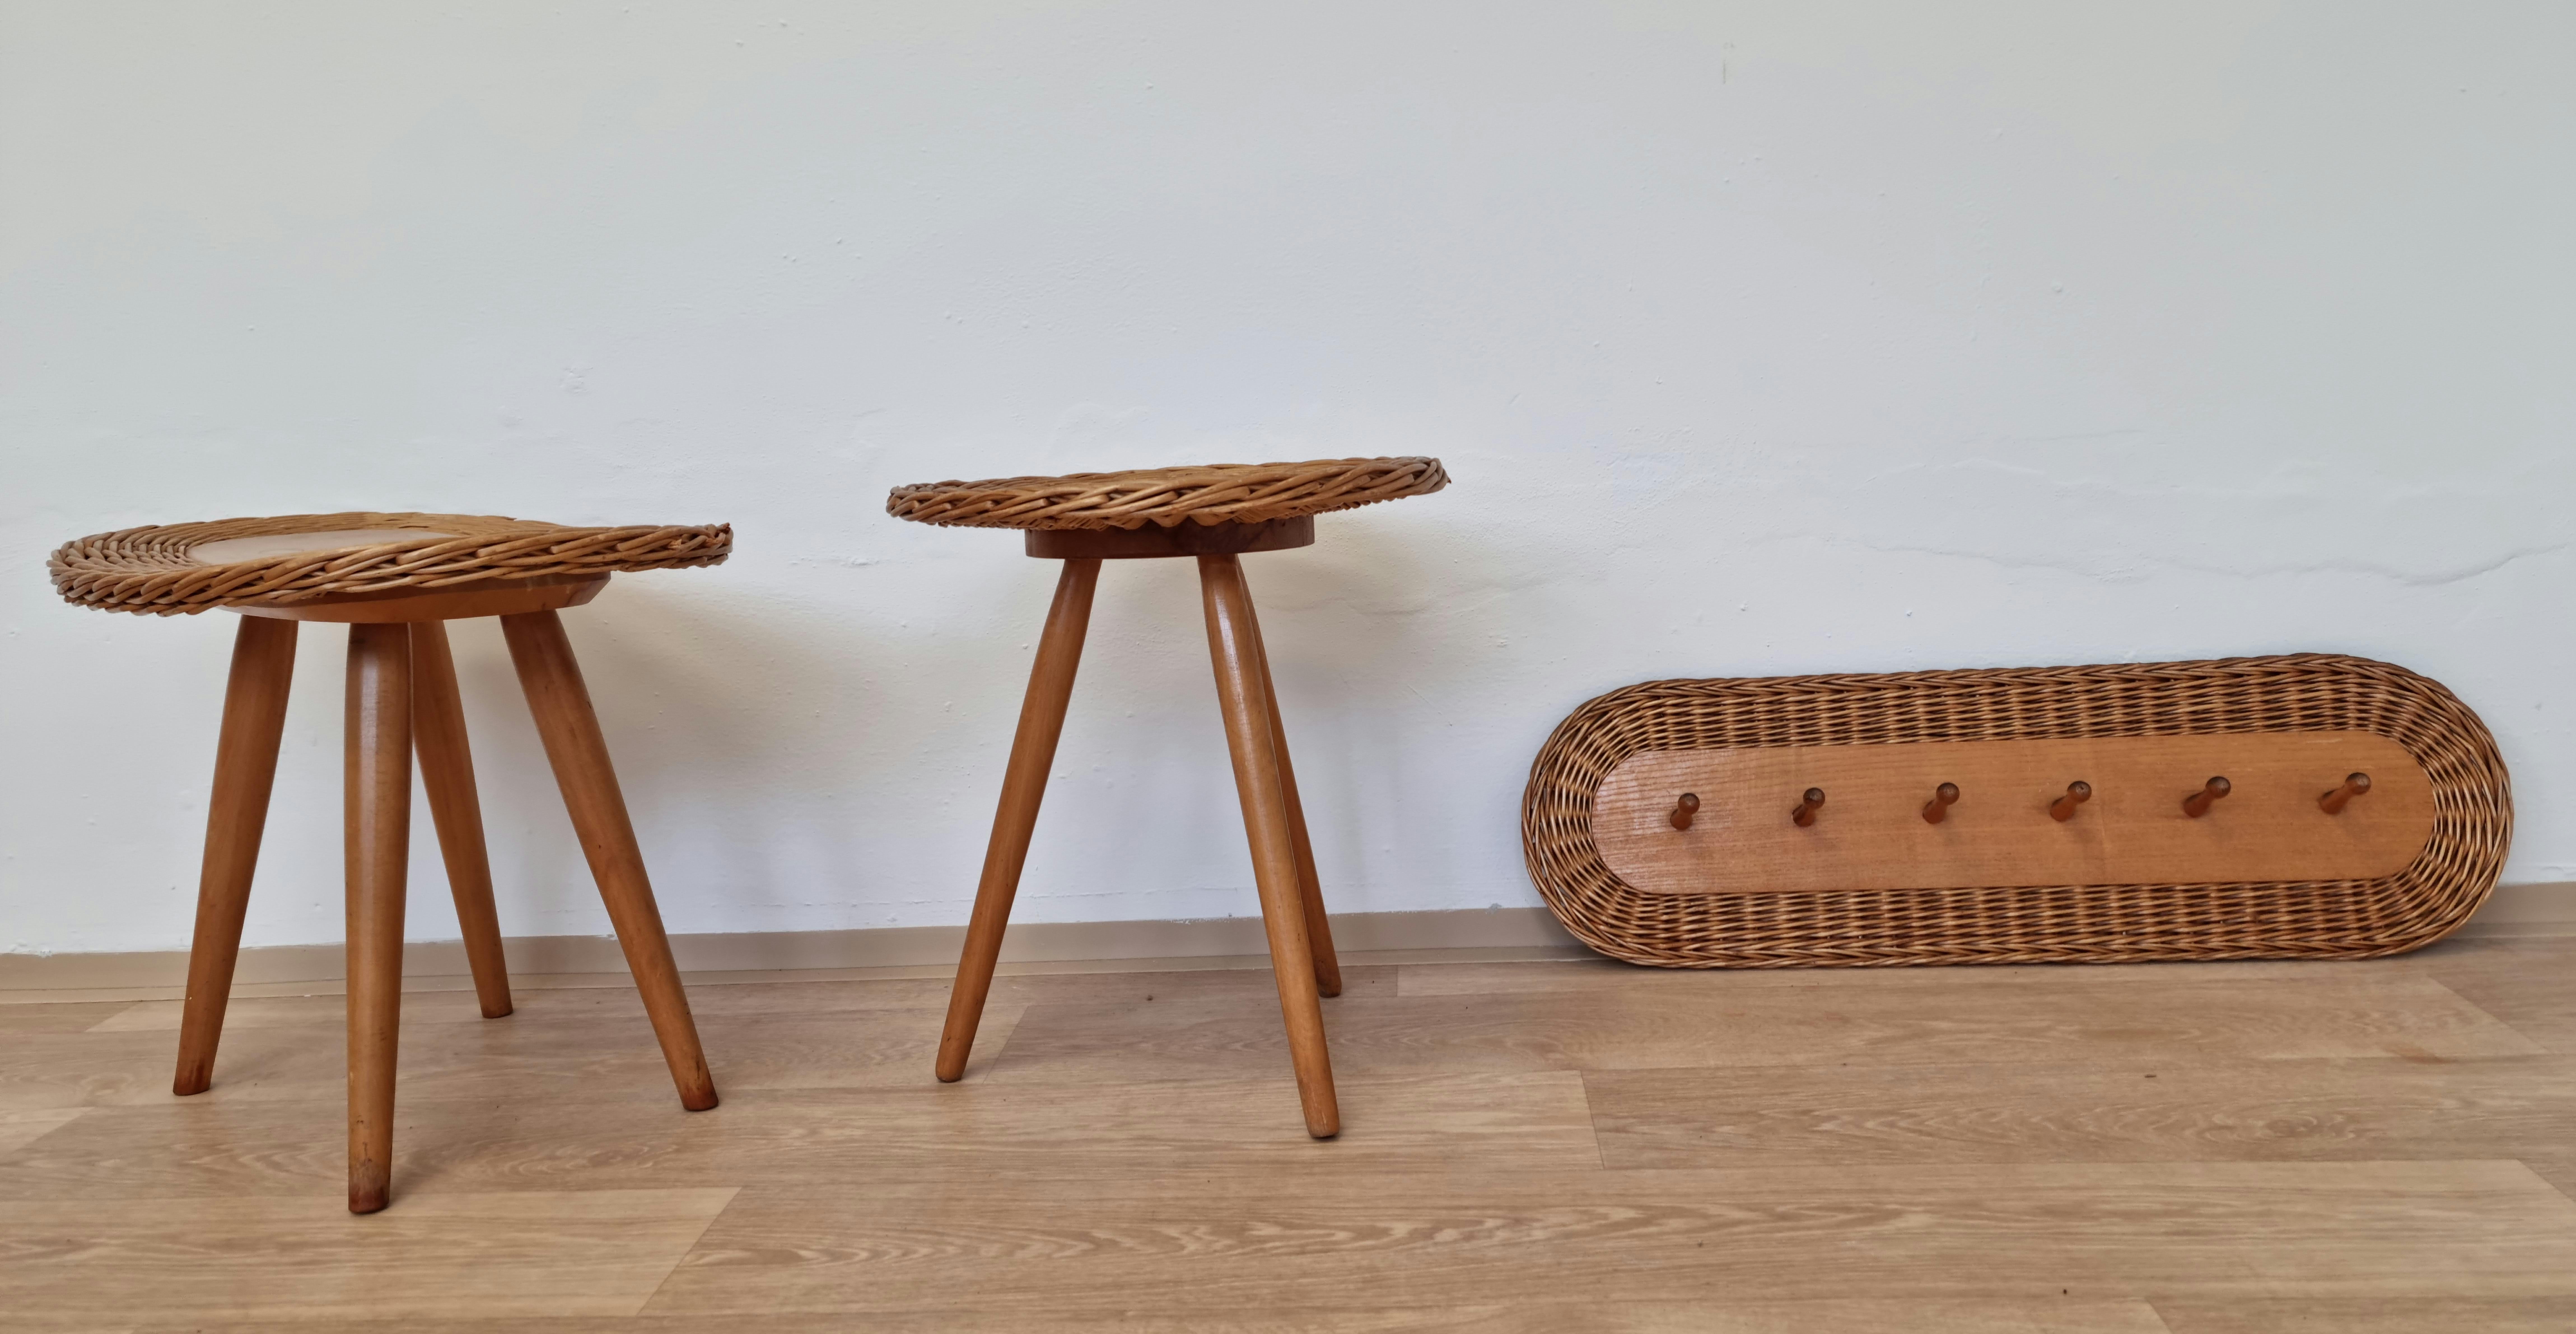 Czech Set of Rattan and Wood Stools with Wall Coat Rack ULUV, Jan Kalous, 1960s  For Sale